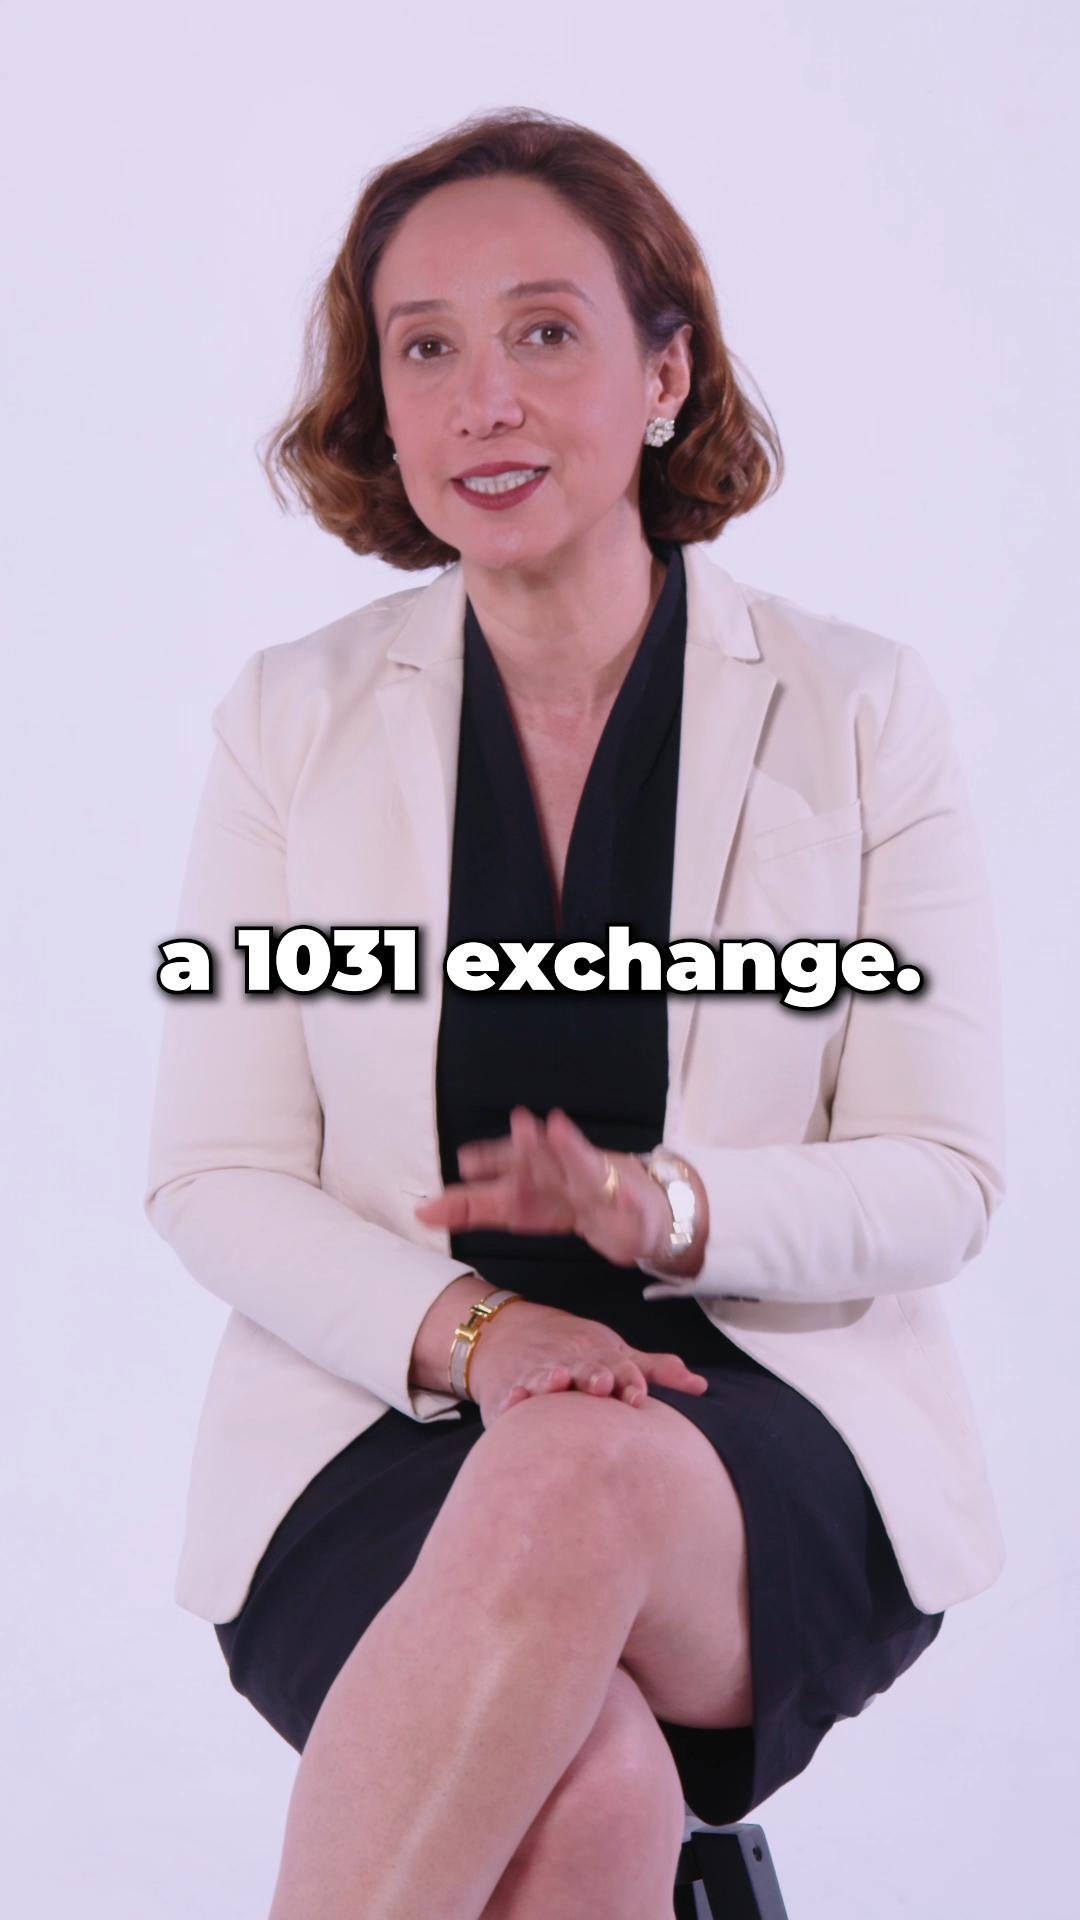 What is 1031 Exchange?